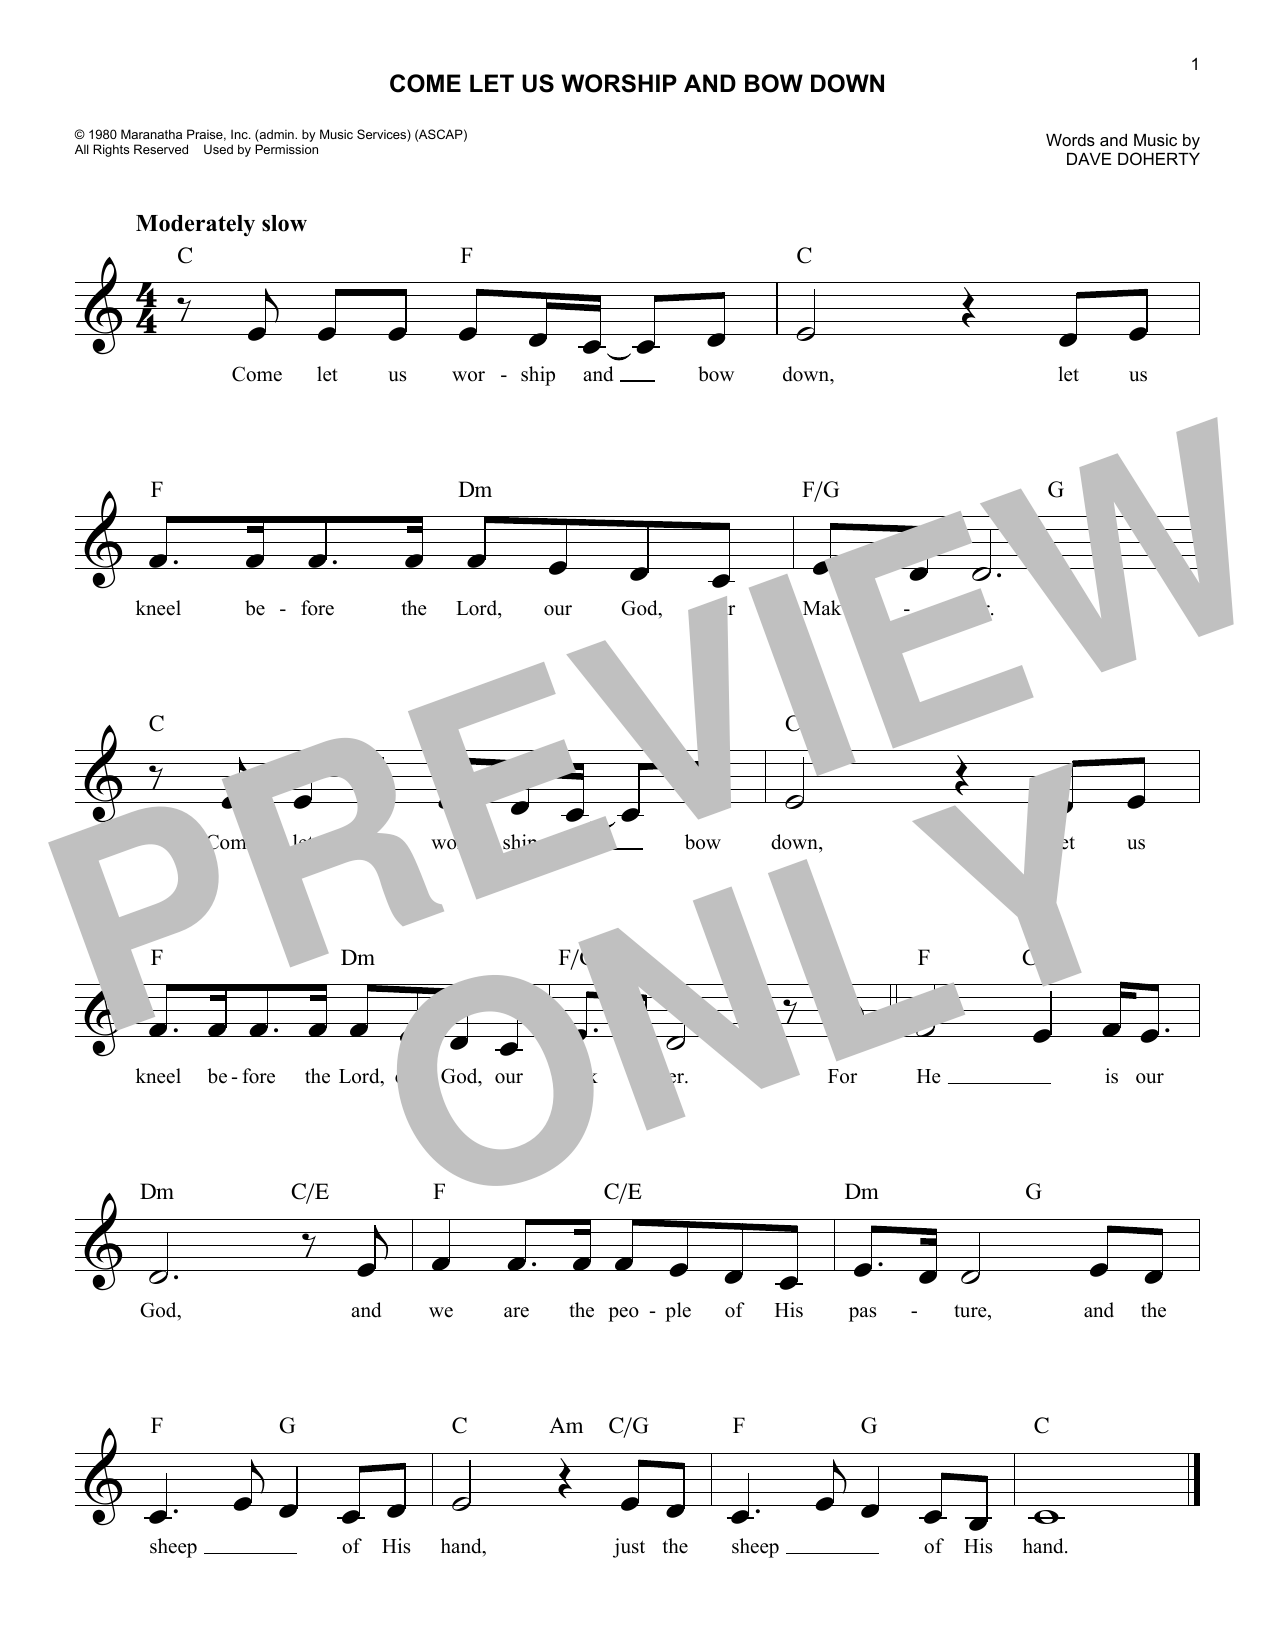 Download David J. Doherty Come Let Us Worship And Bow Down Sheet Music